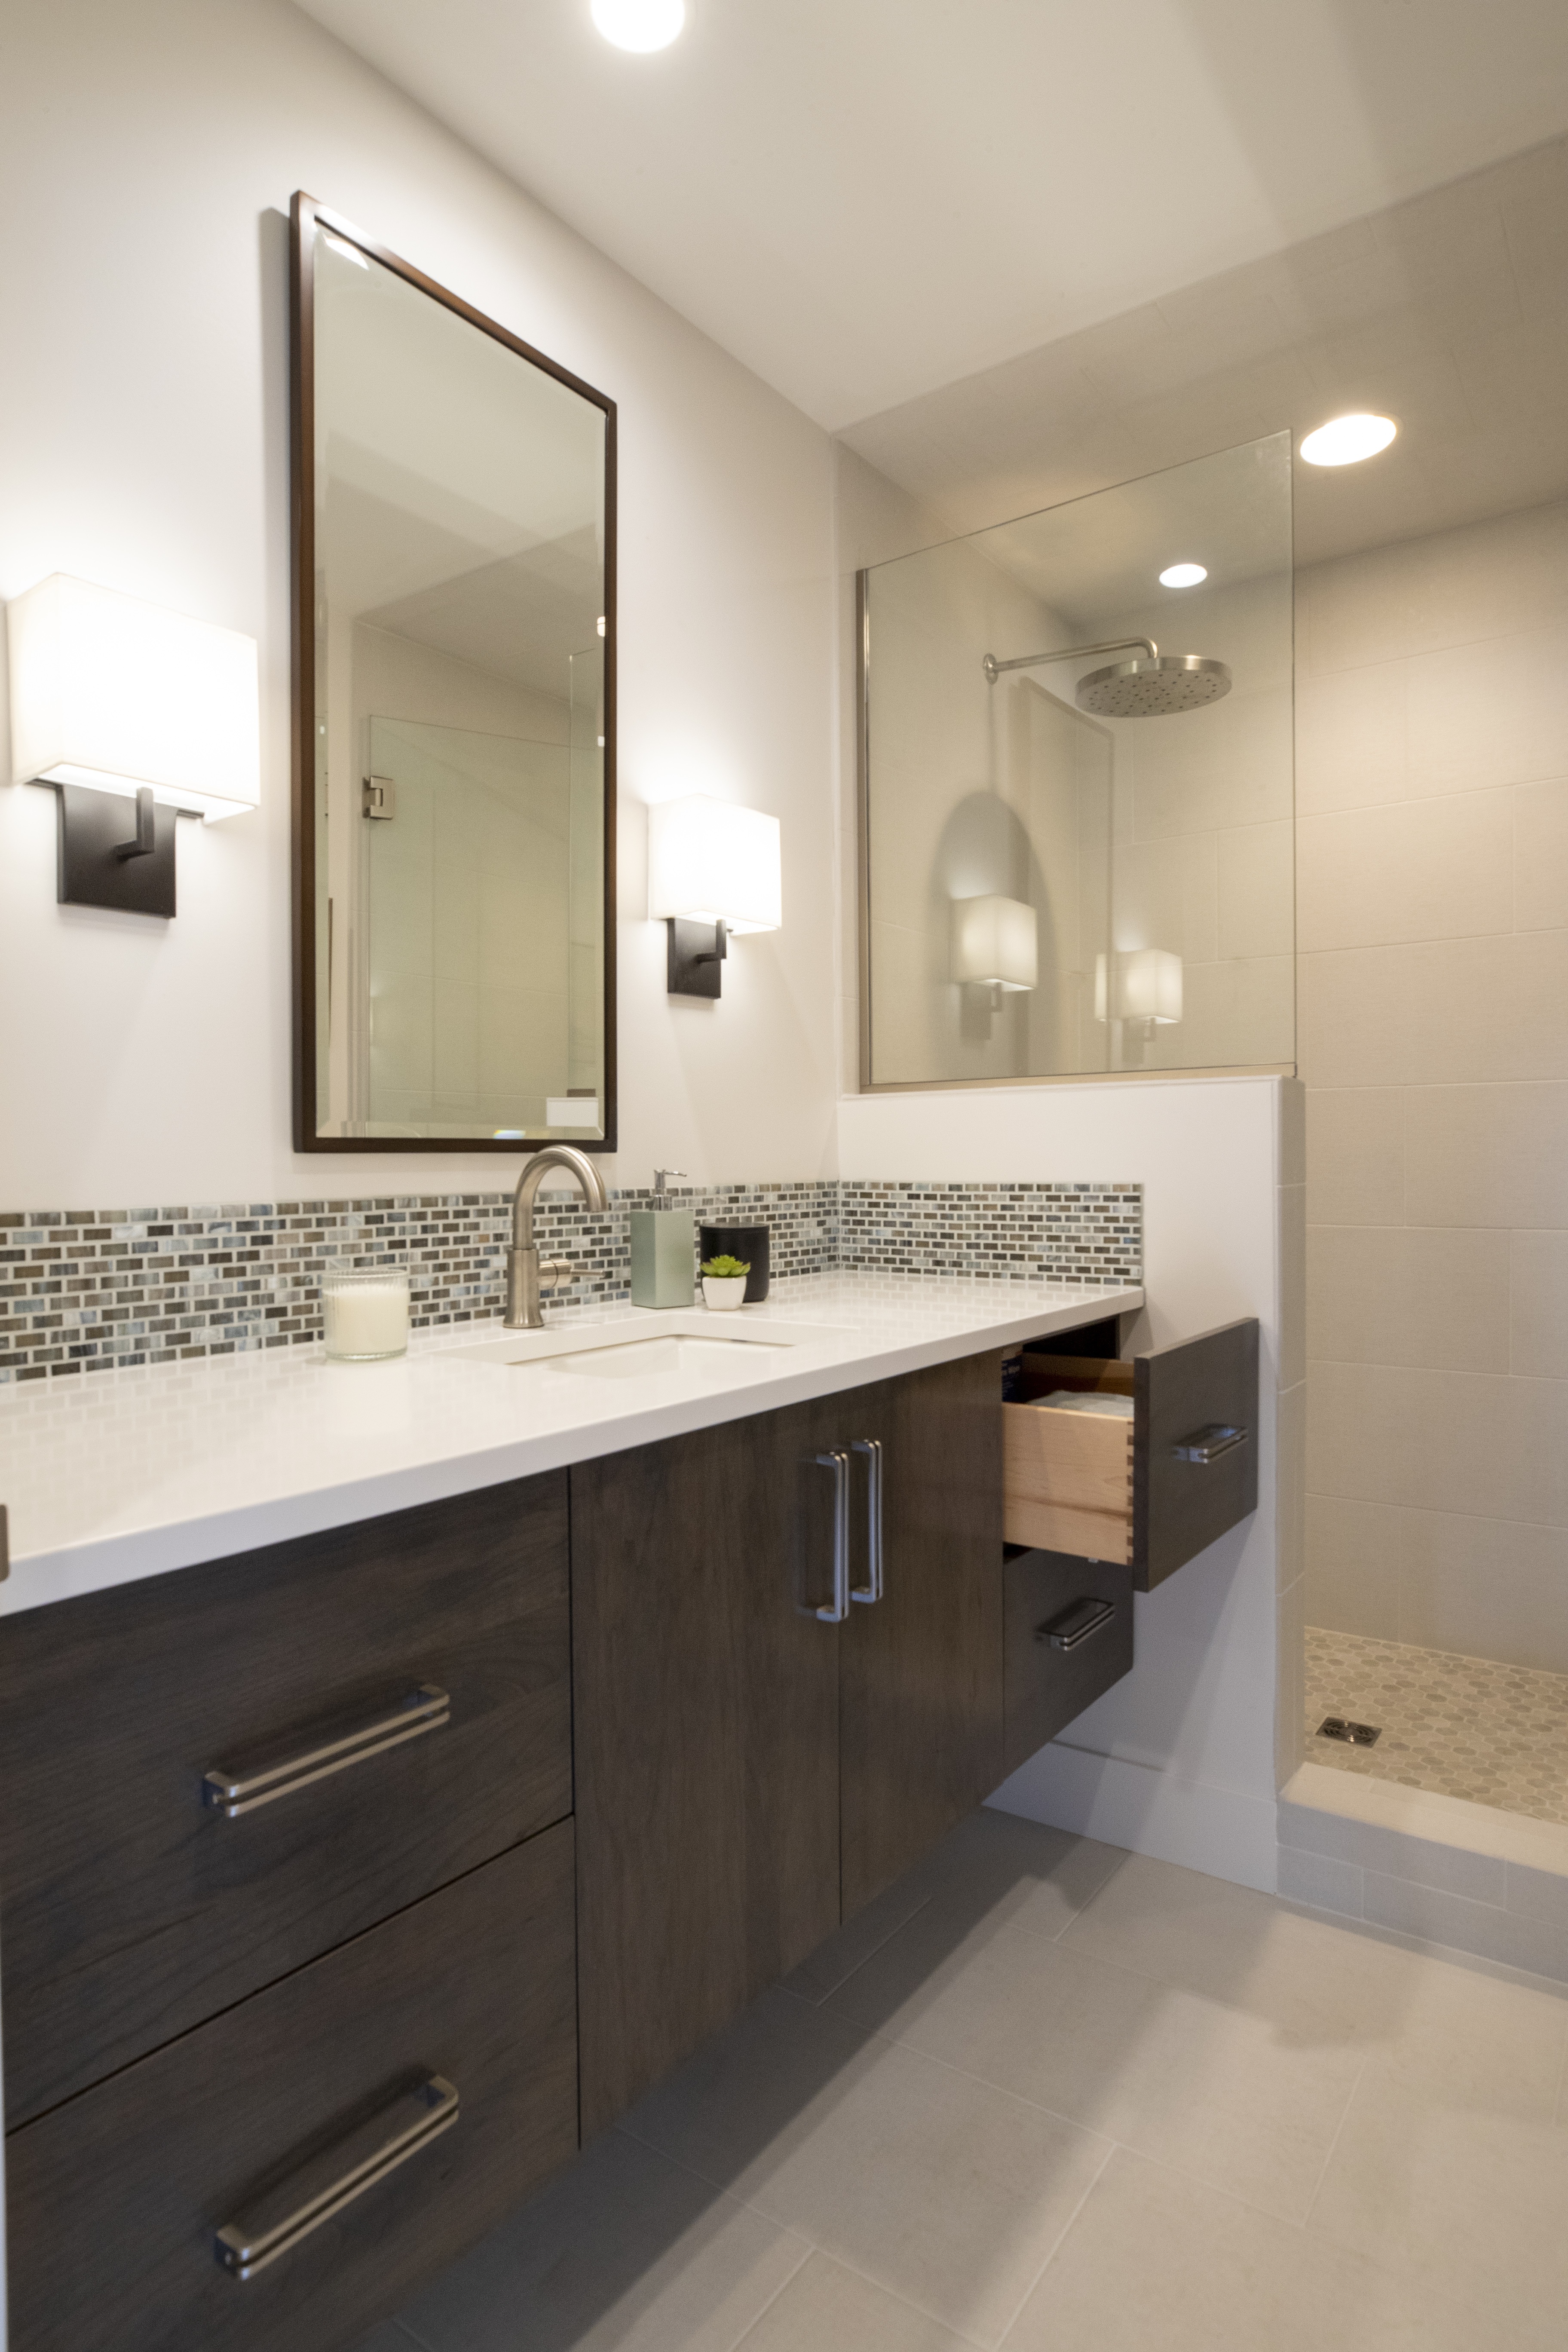 Bathroom with modern cabinets